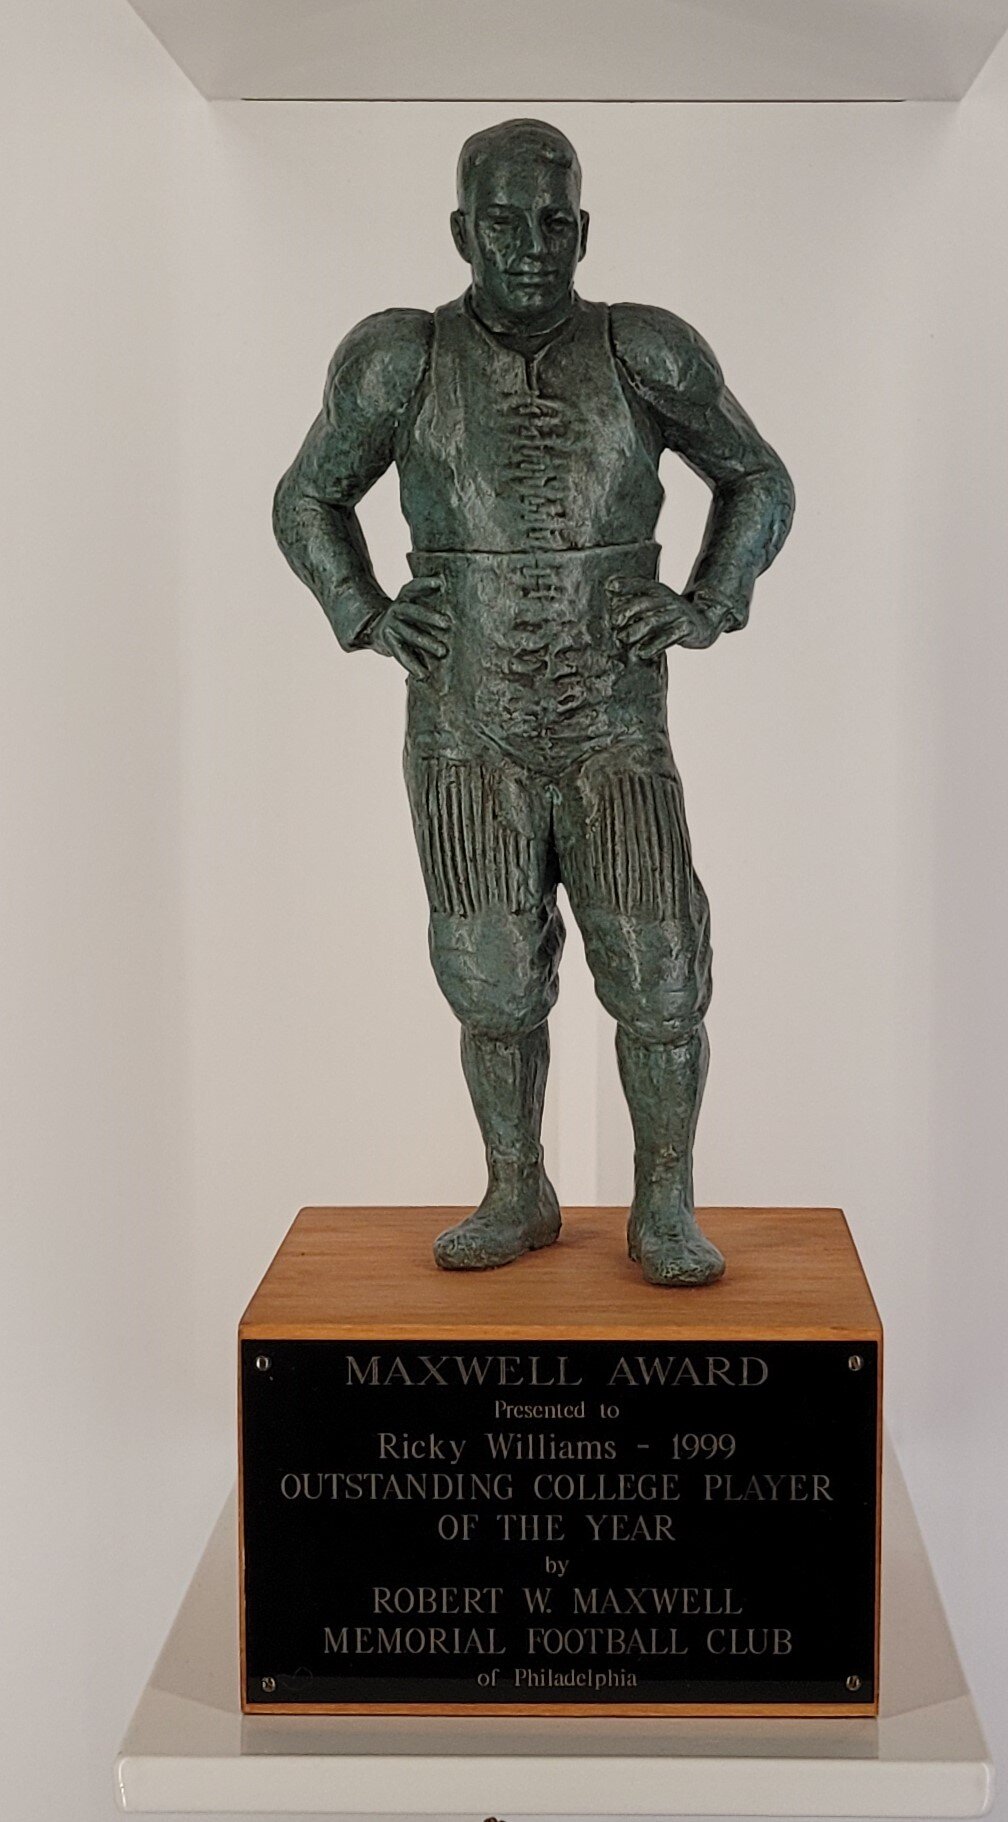 Maxwell Award - College player of the year - Ricky Williams 1999.jpg